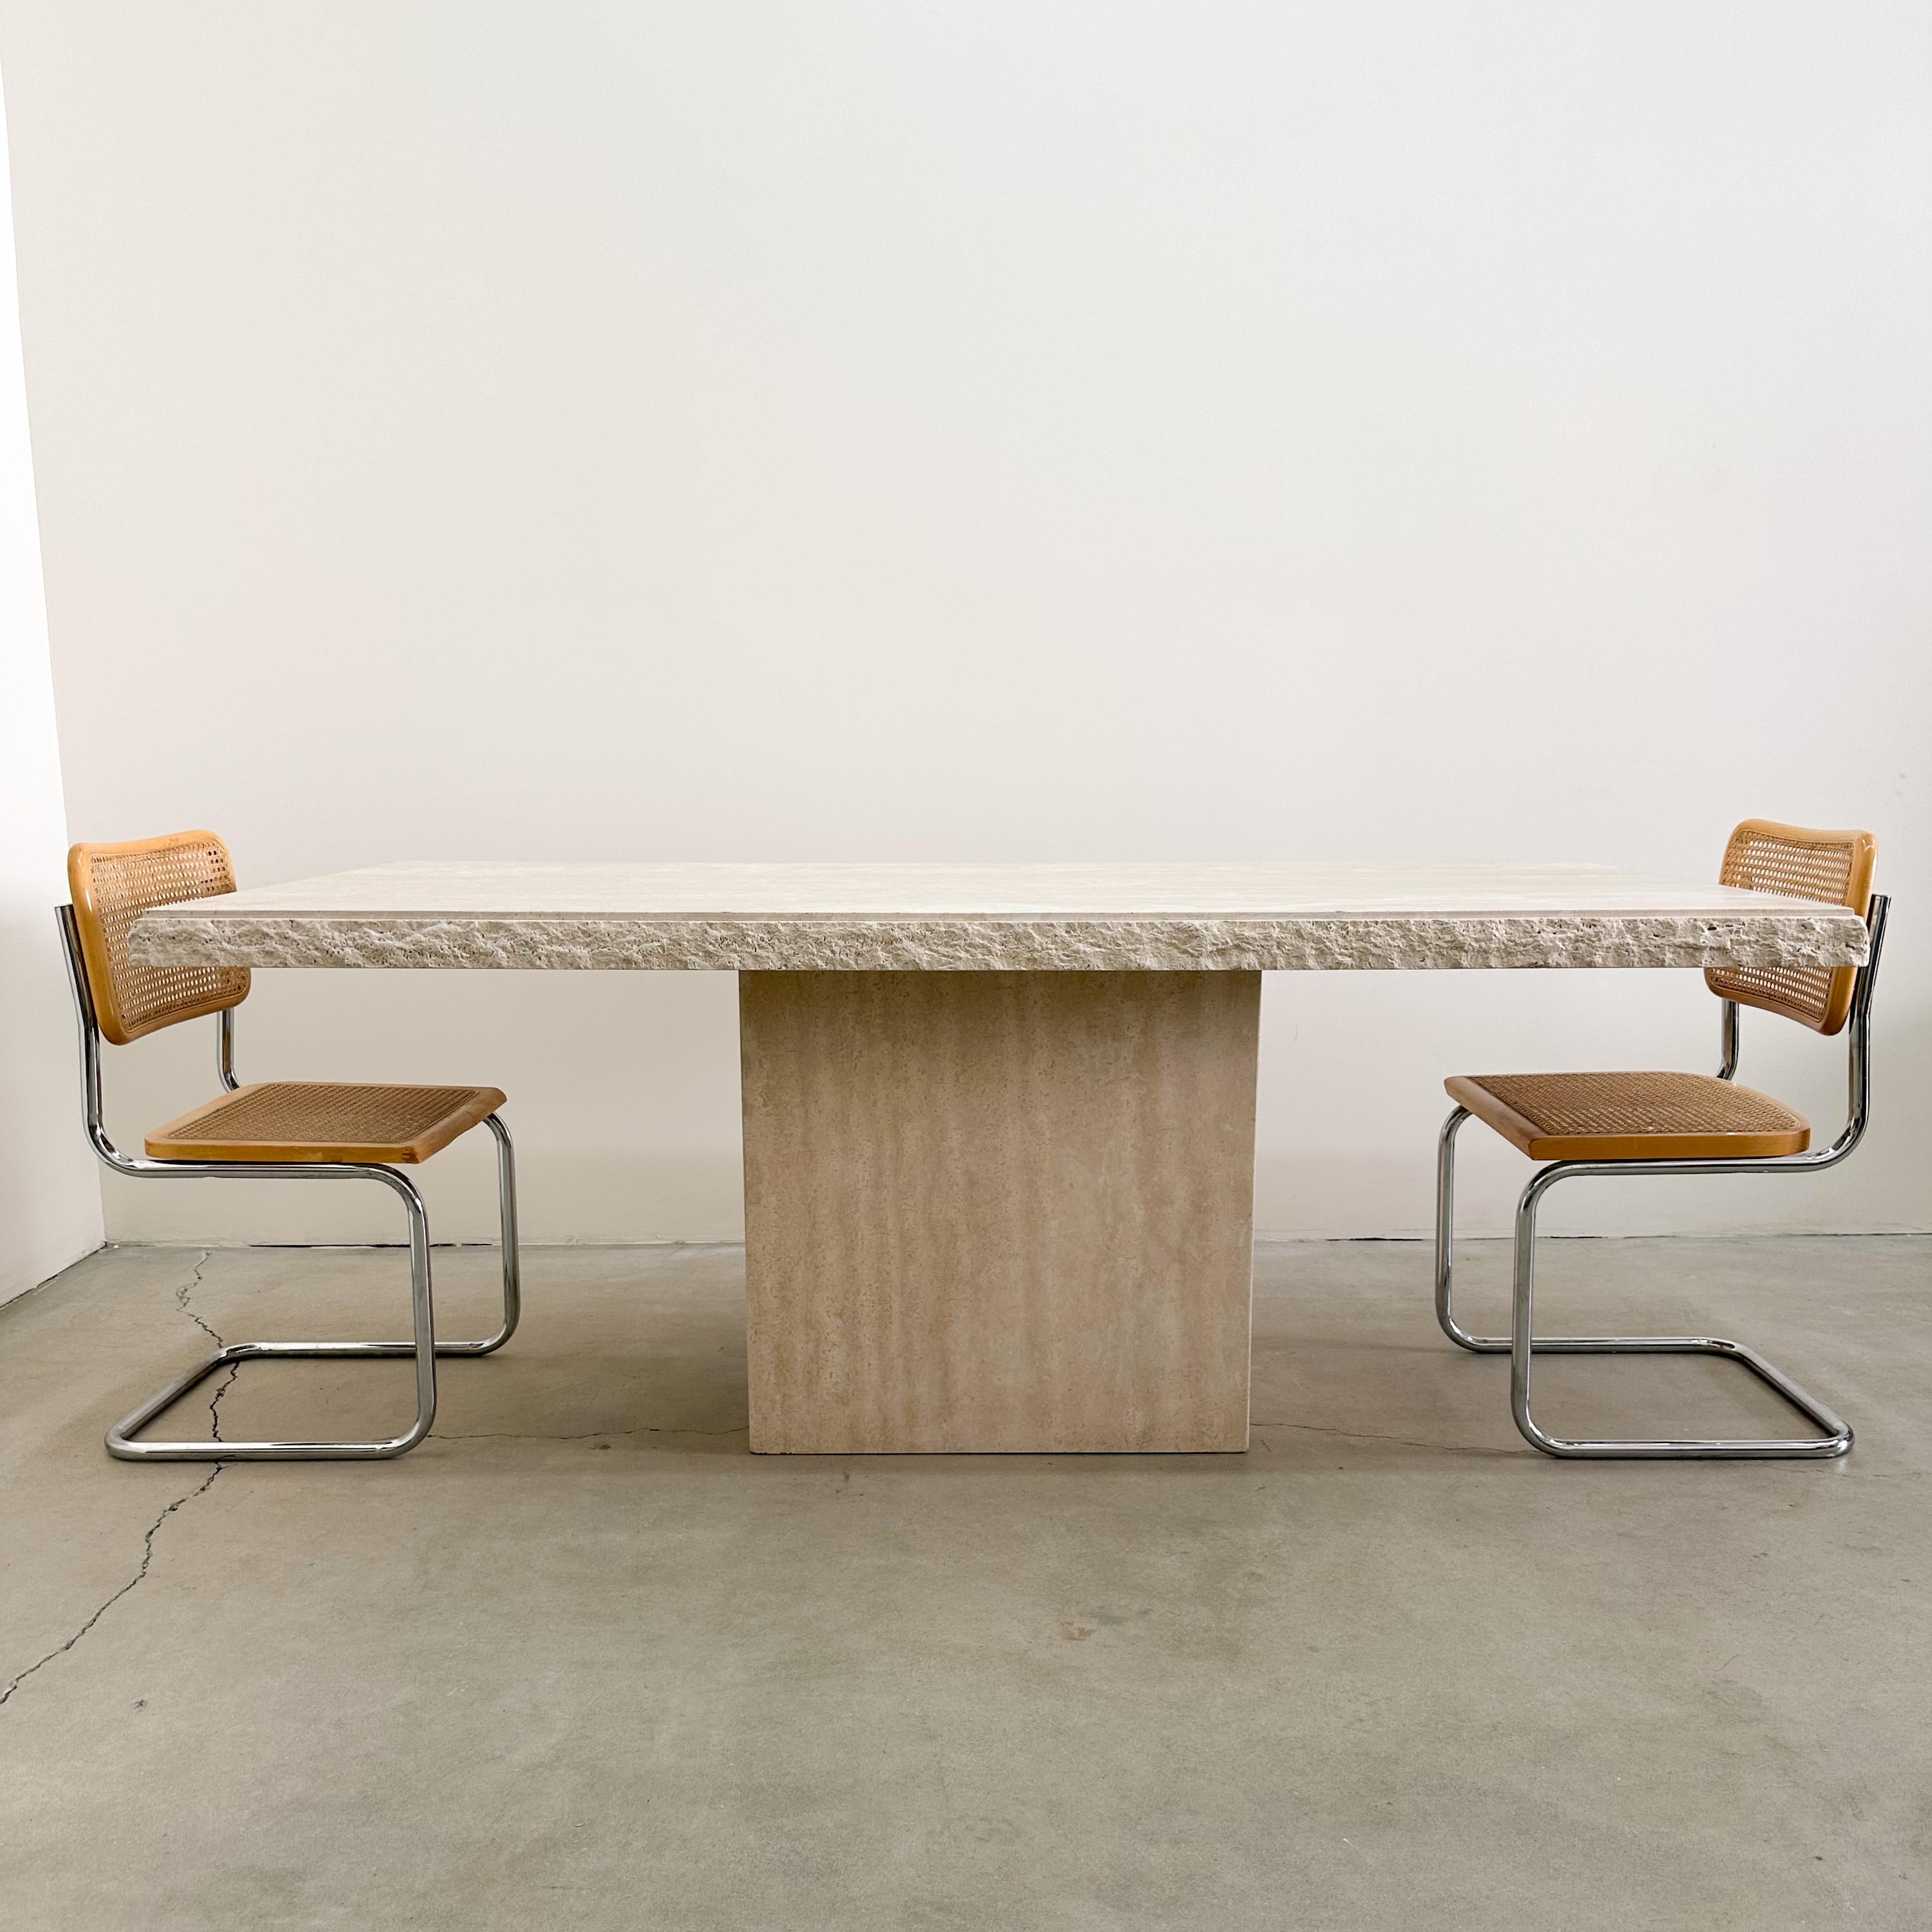 Vintage Rectangle Raw Edge Travertine Dining Table. 

Material: The table is made from solid travertine stone, which is known for its natural and timeless appeal.

Design: It's a two-part table with a tabletop that rests on a stand. The raw edge